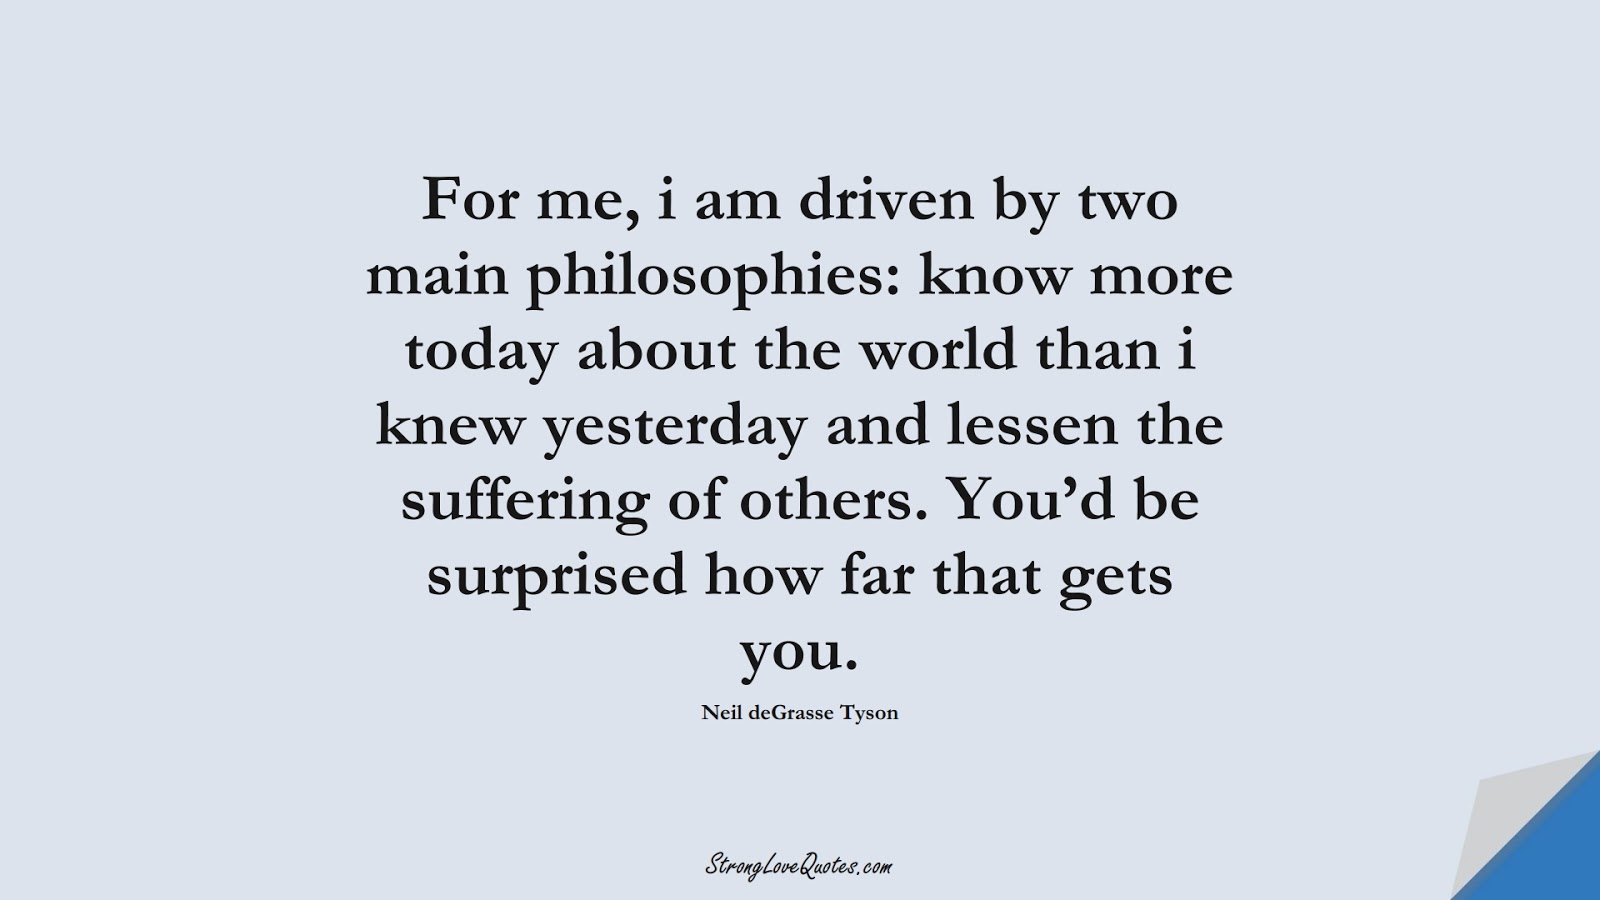 For me, i am driven by two main philosophies: know more today about the world than i knew yesterday and lessen the suffering of others. You’d be surprised how far that gets you. (Neil deGrasse Tyson);  #KnowledgeQuotes